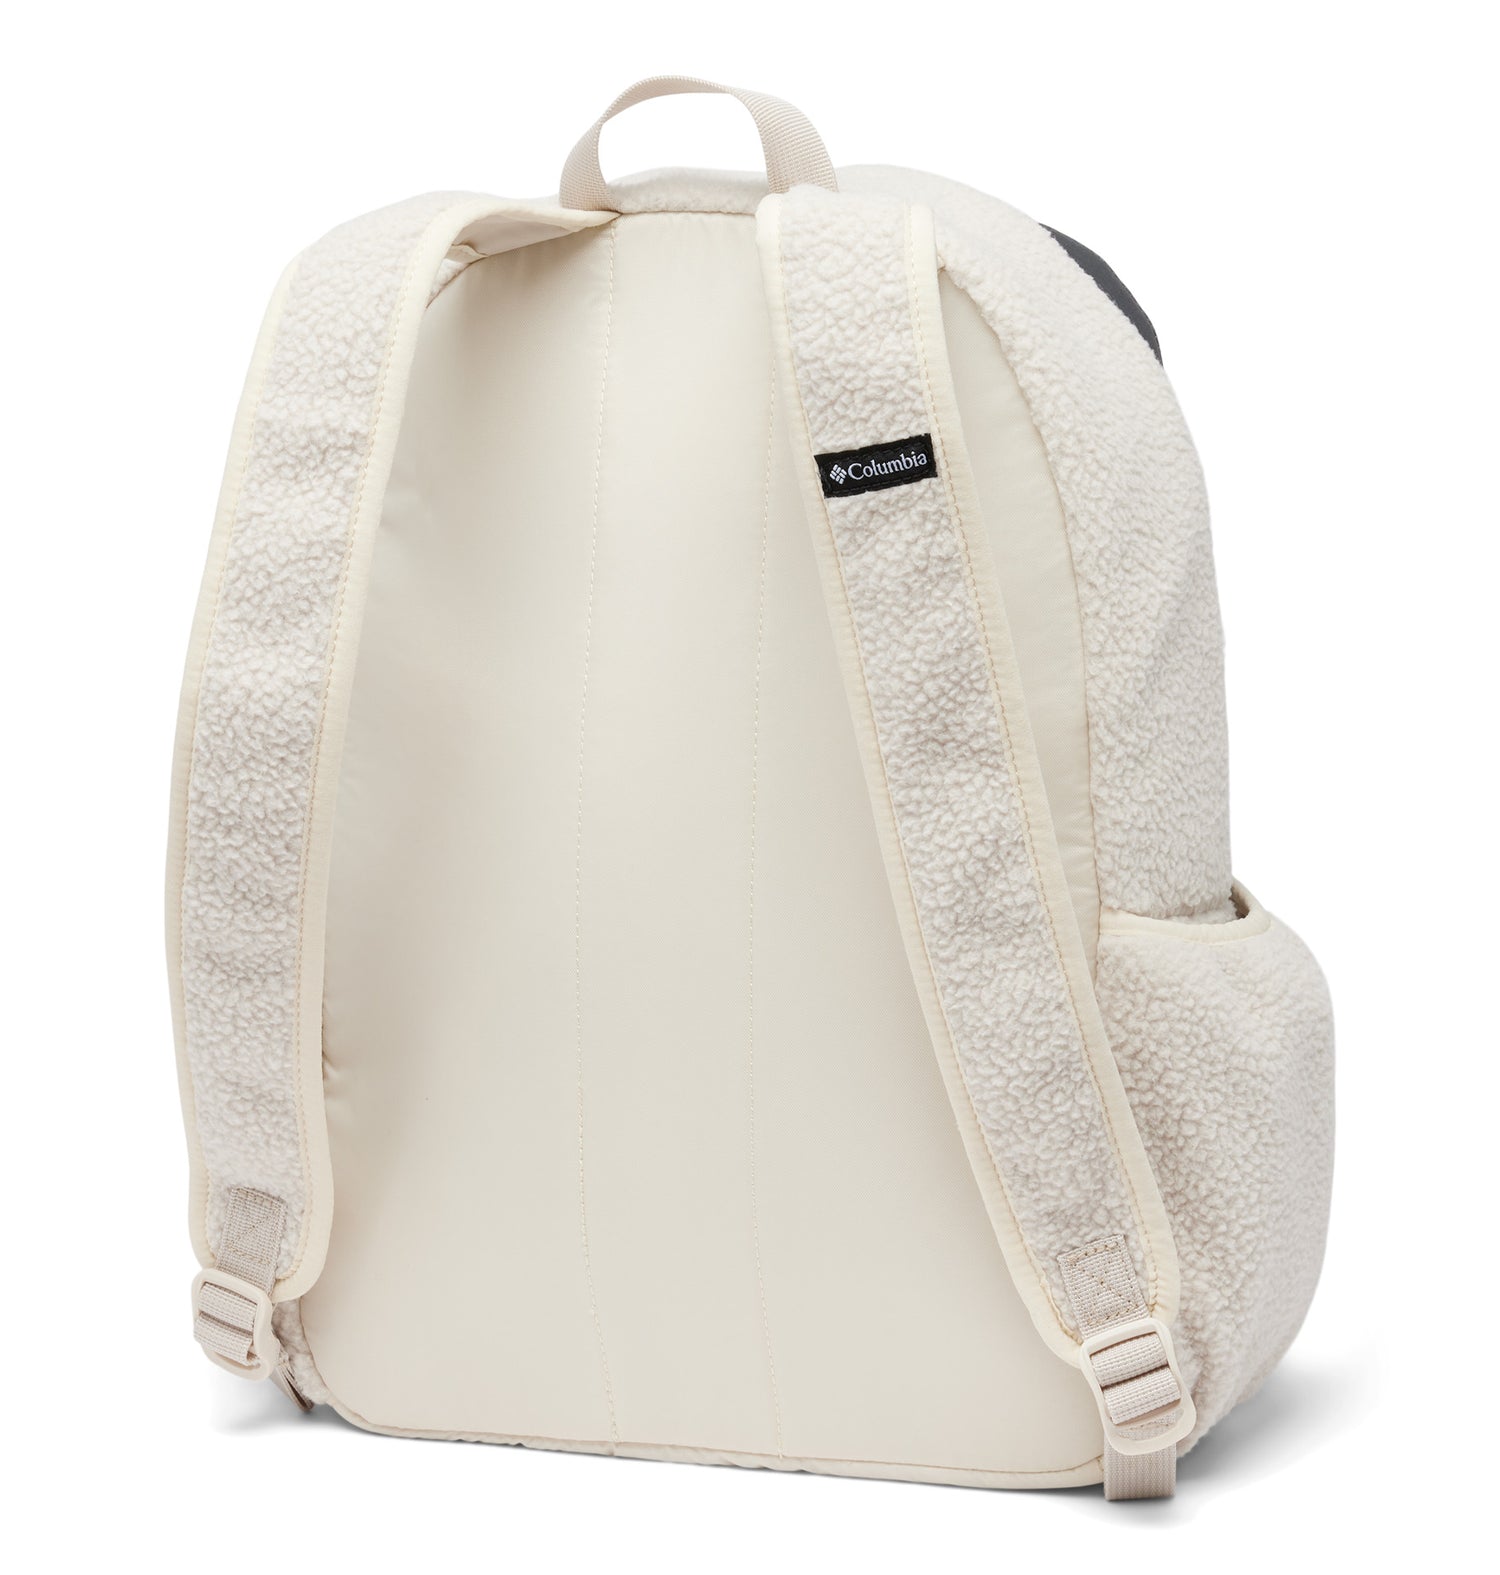 Back side of a white backpack called Helvetia designed by Columbia showing its fleece texture, straps, top handle, and one side pocket.